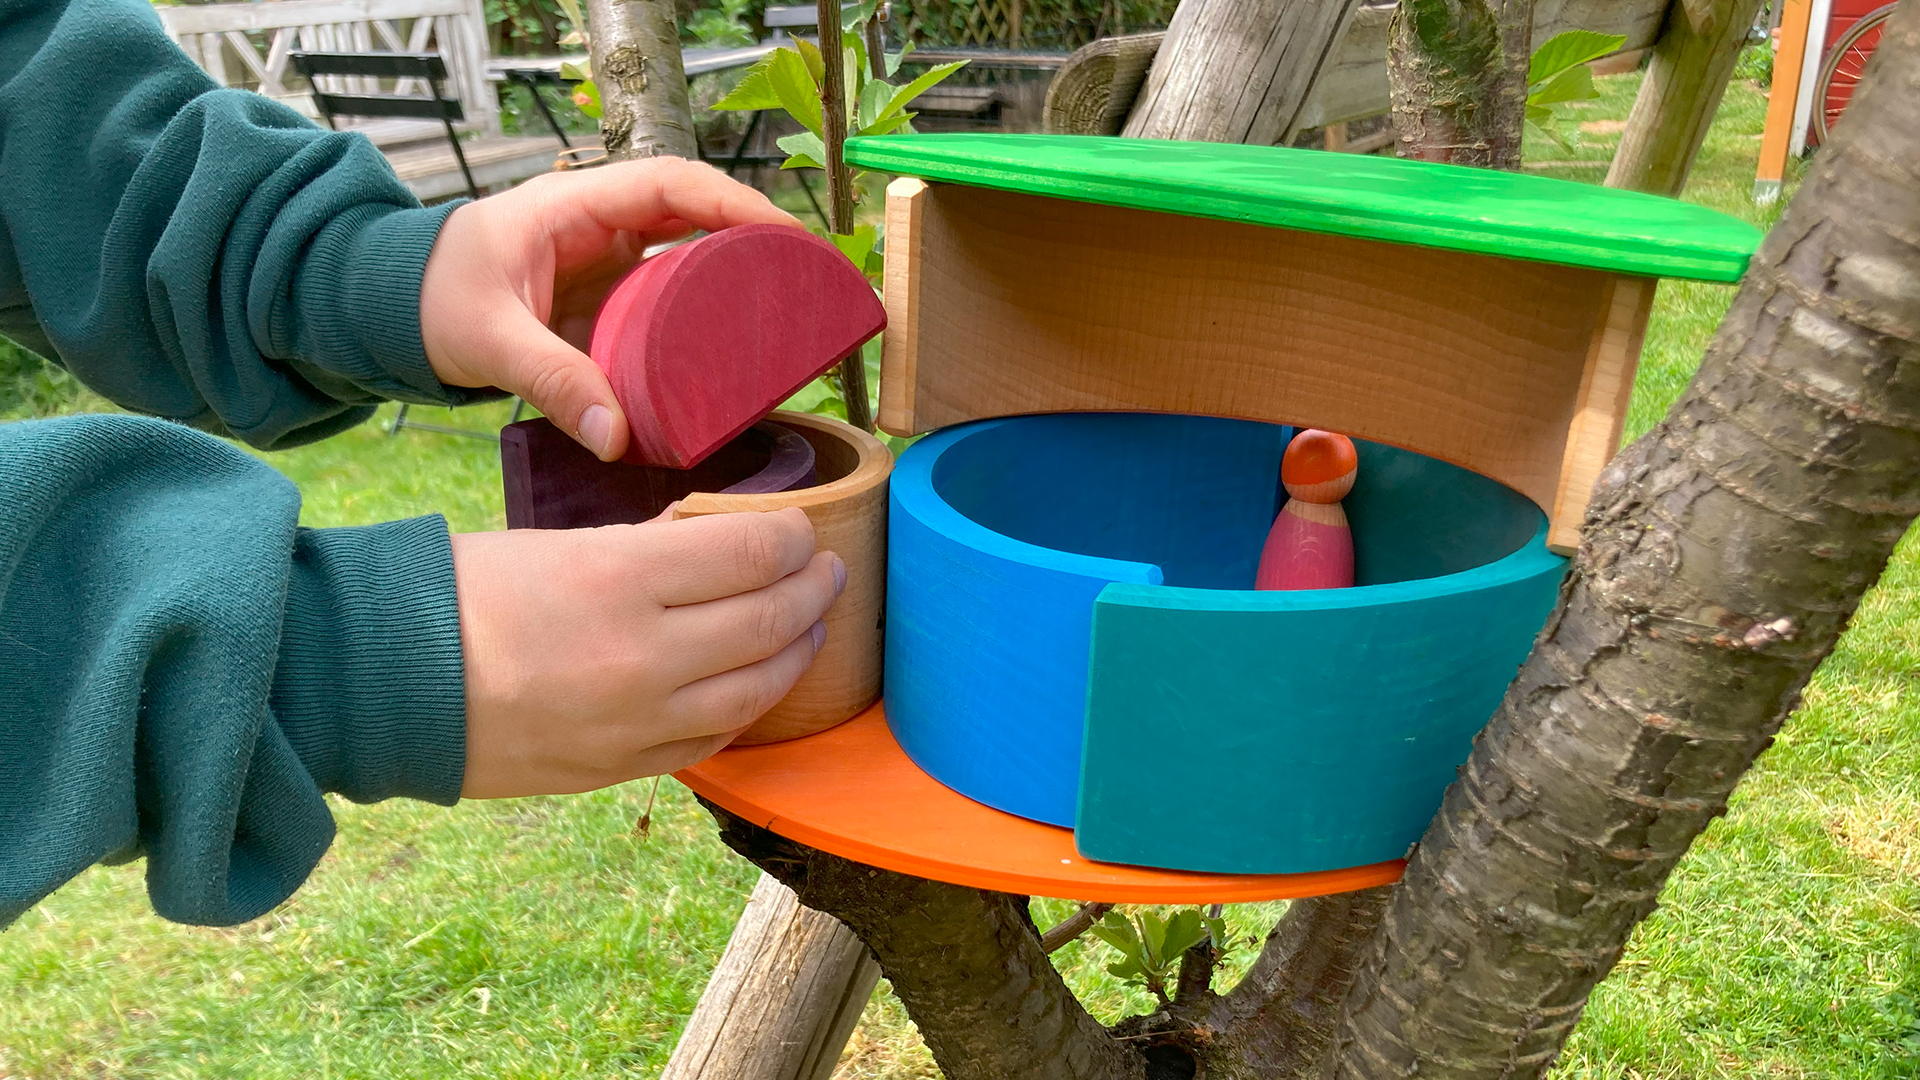 A tiny tree house is built by a childs hands in a real tree with wooden toys.